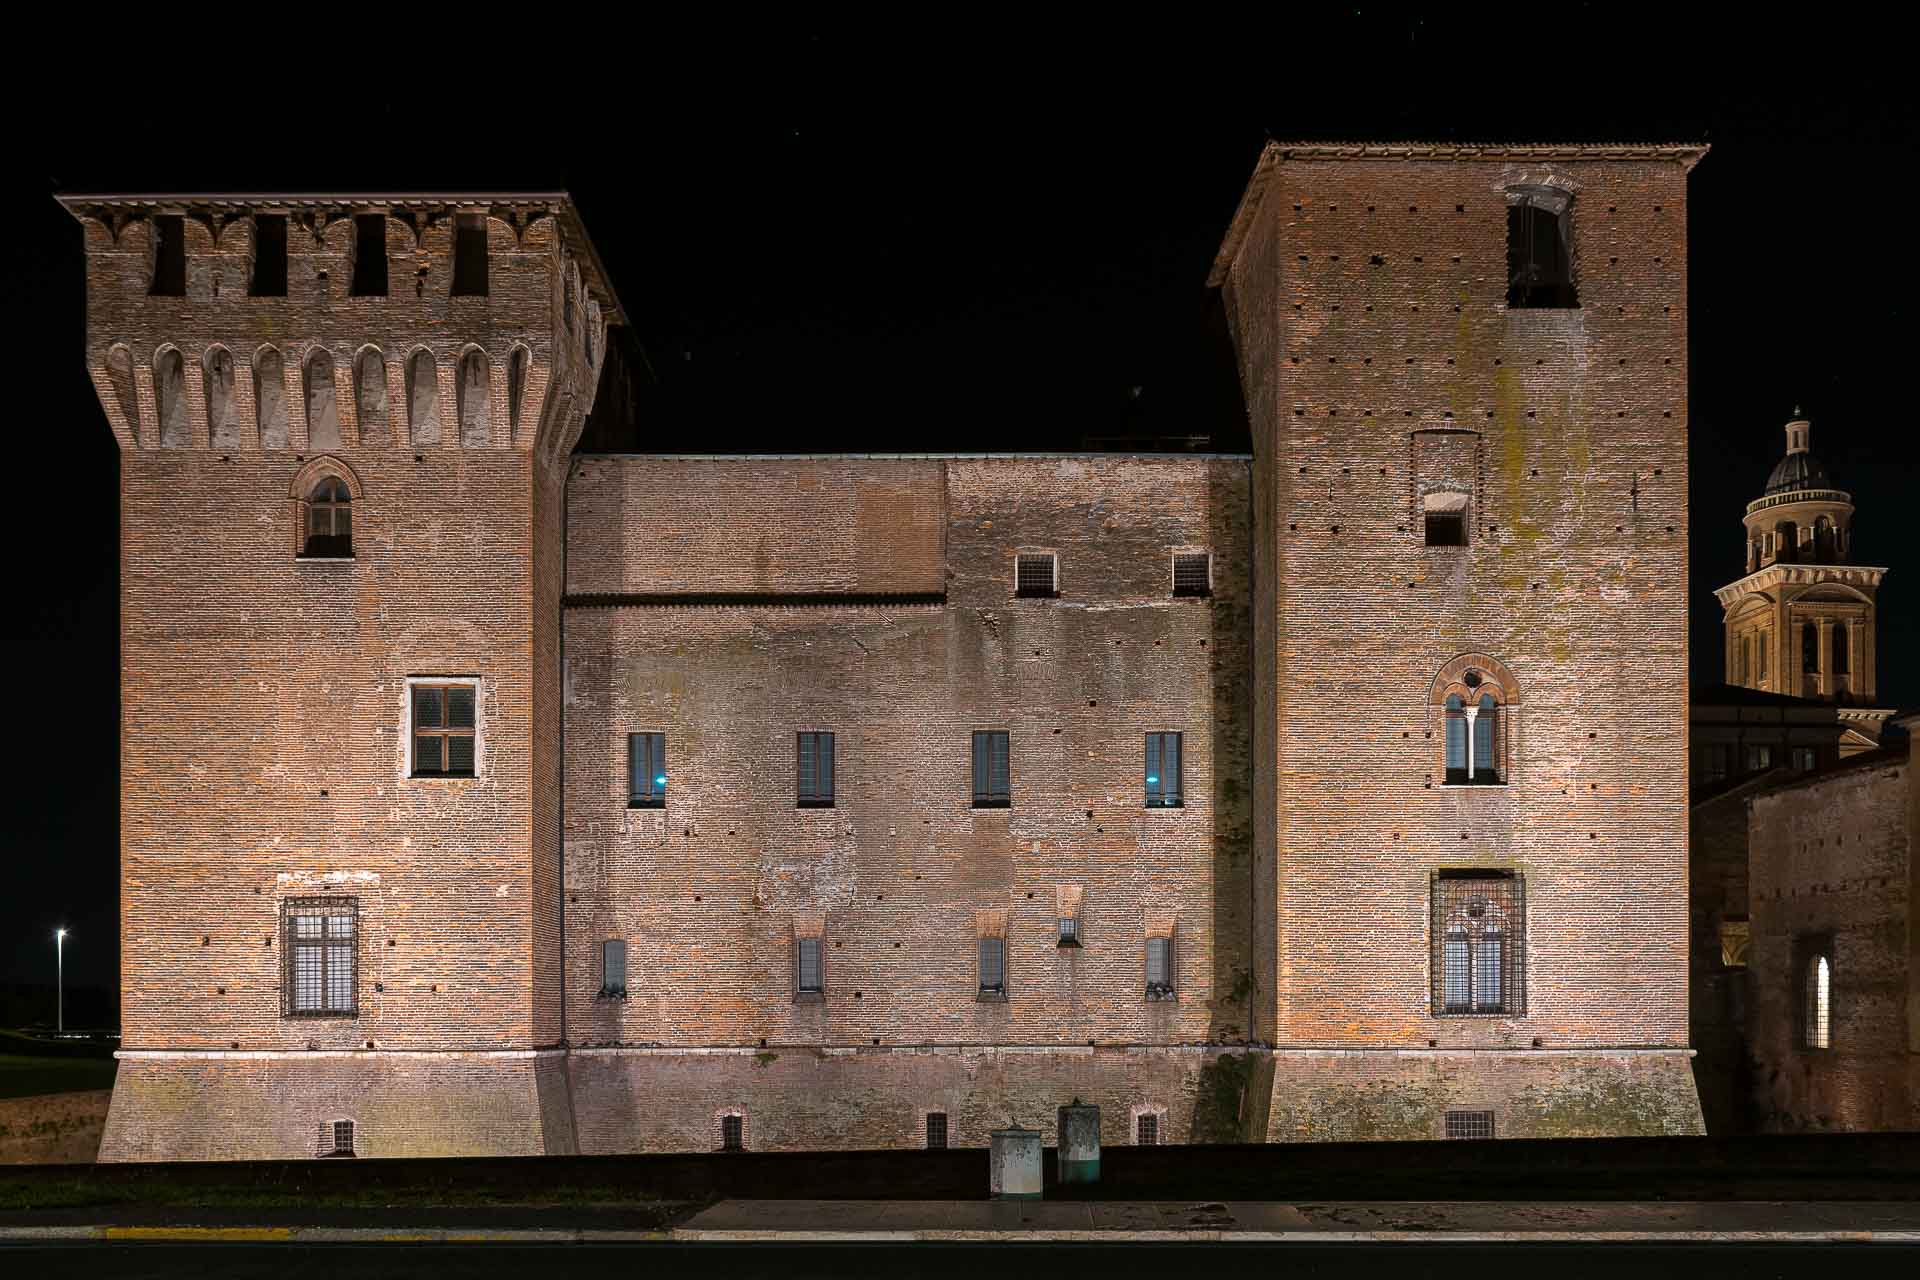 The facade of the castle in Mantua at night